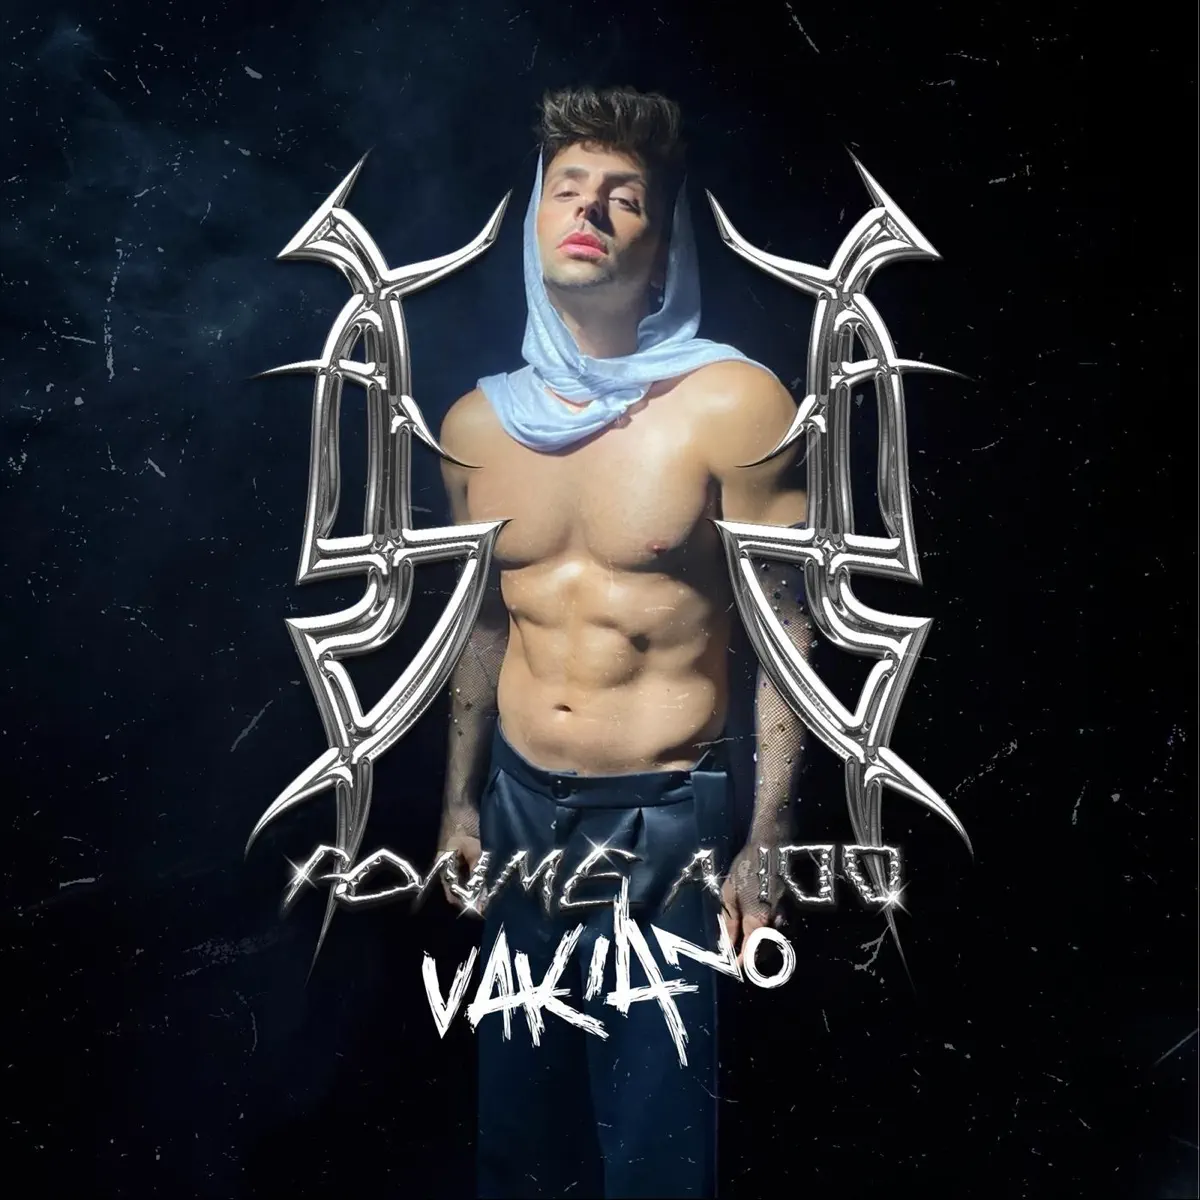 Vakiano - PONME A 100 - Single (2023) [iTunes Plus AAC M4A]-新房子